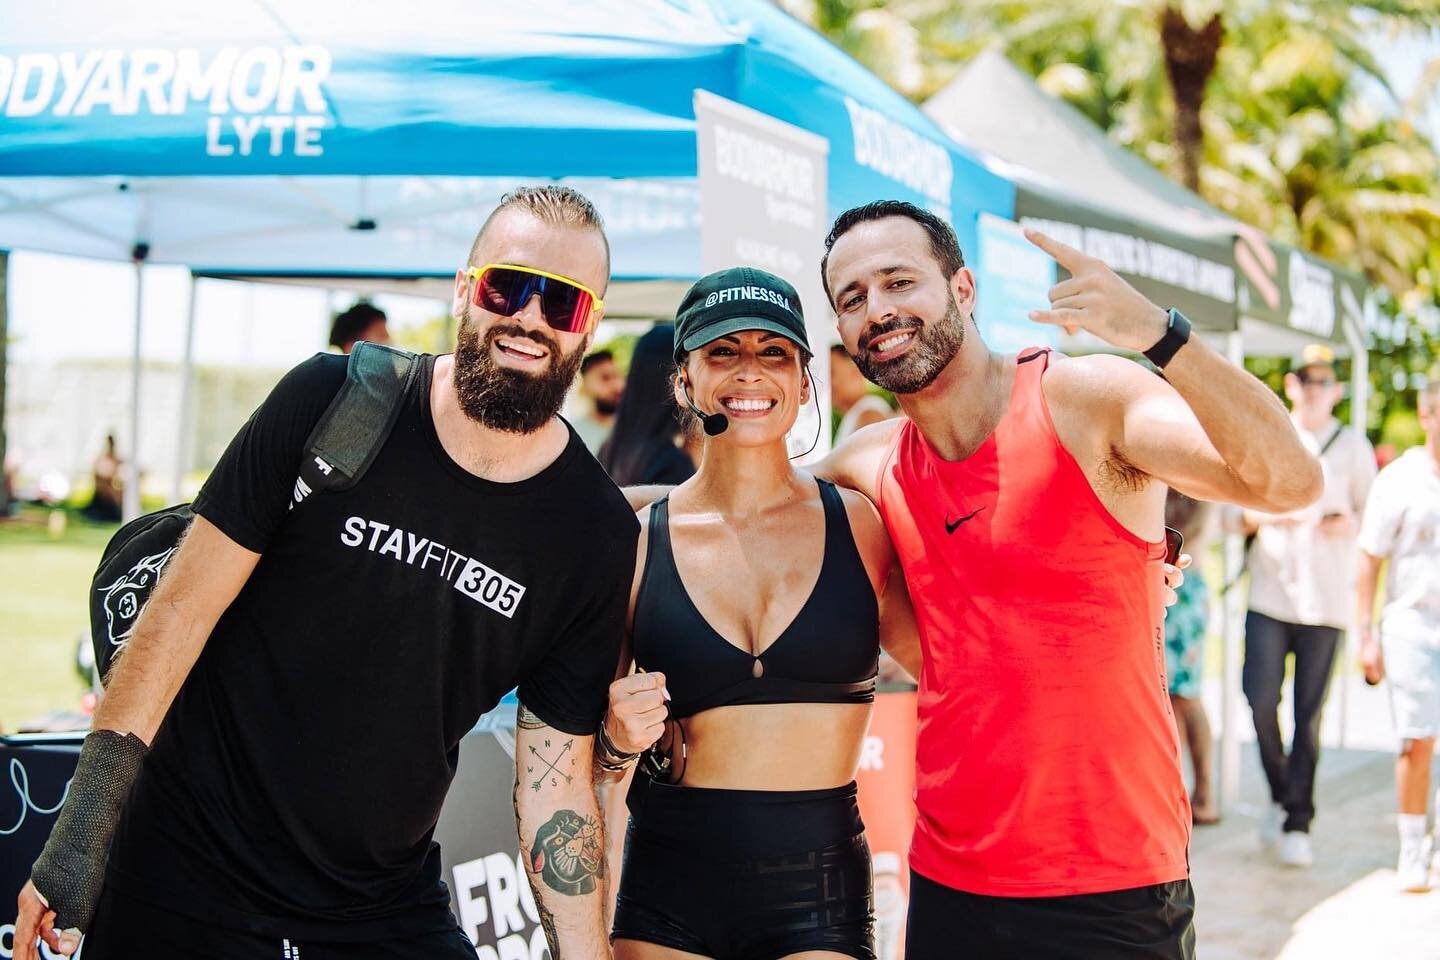 Throwing it back to the 1st installment of the @stayfit305 Summer Sweat Series with @mikisabotage and @fitnesssa which was KILLER!

Who&rsquo;s coming out August 7th to join me and @valeriesenior to close the series out? 🙌🏼🙌🏼 Let&rsquo;s bring th